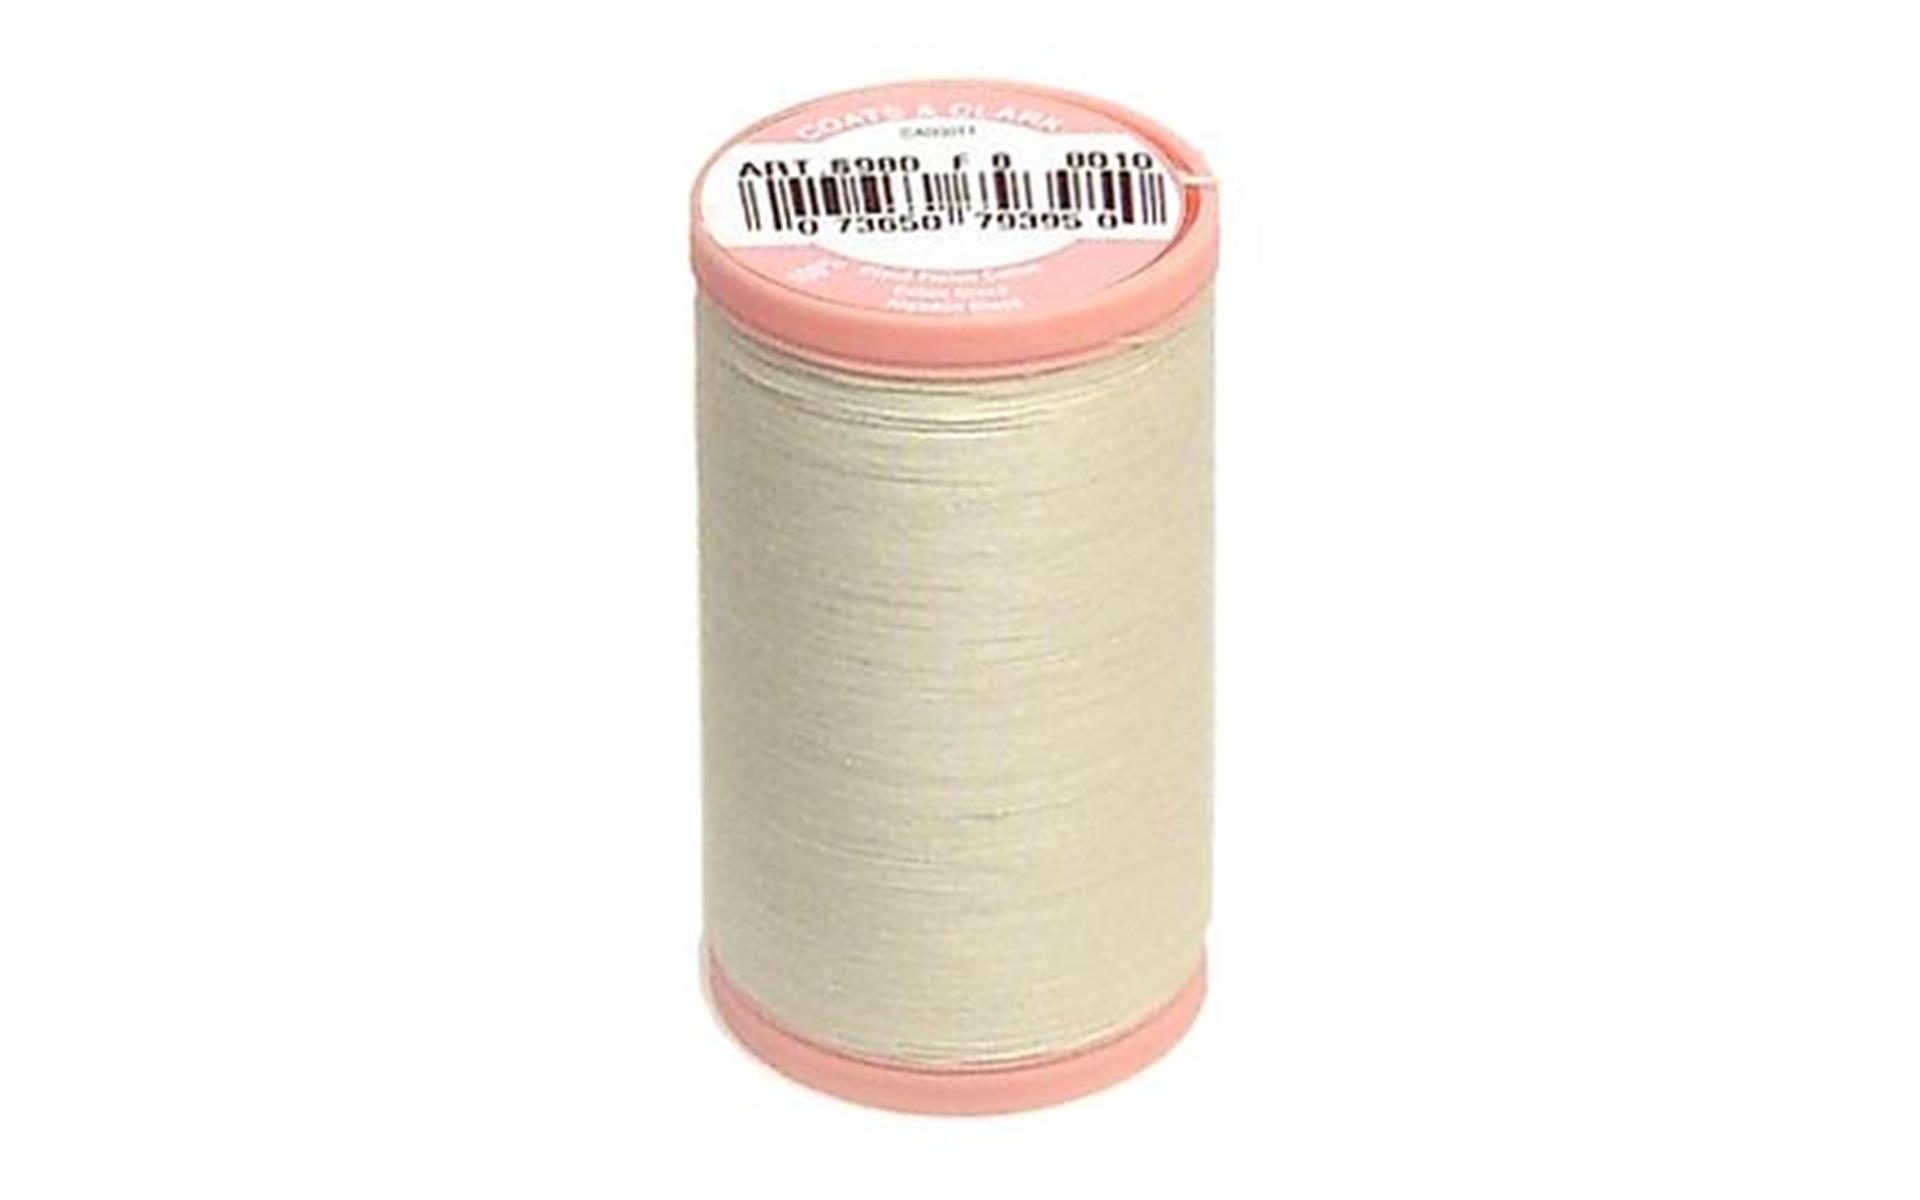 Coats Cotton Hand Quilting Thread 350yd Natural | eBay